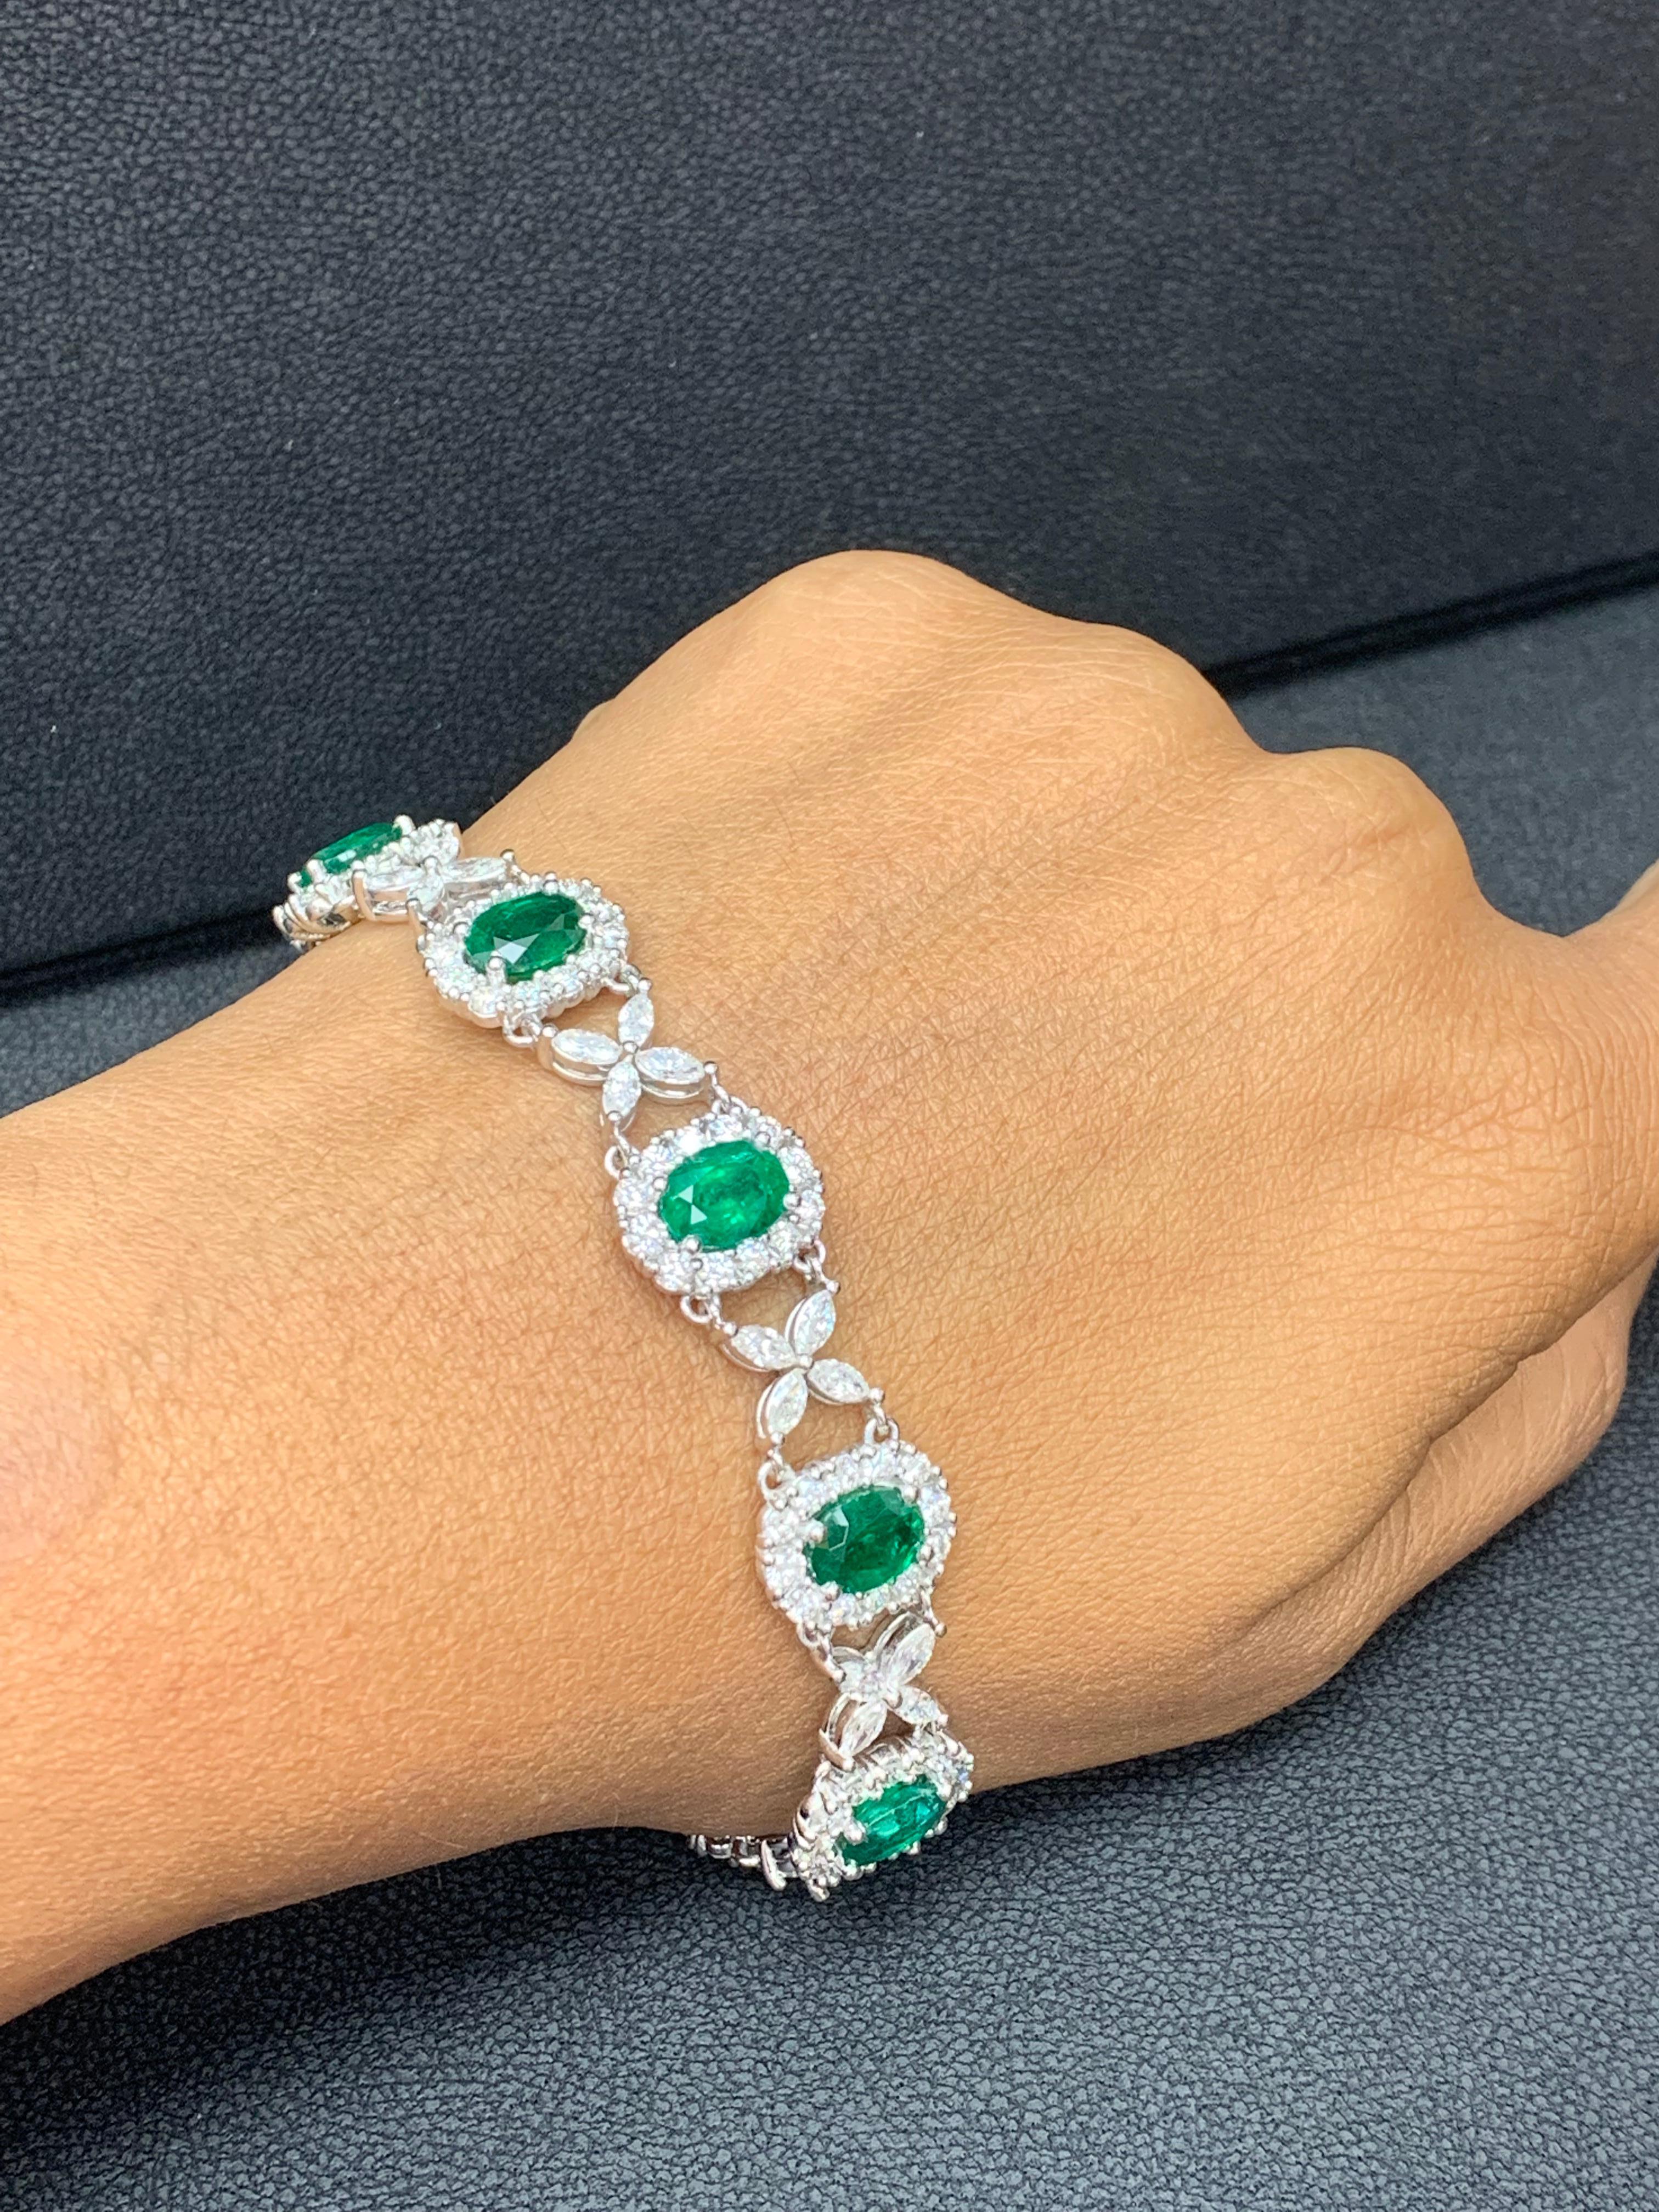 10.52 Carat Oval Cut Emerald and Diamond Tennis Bracelet in 14K White Gold For Sale 8